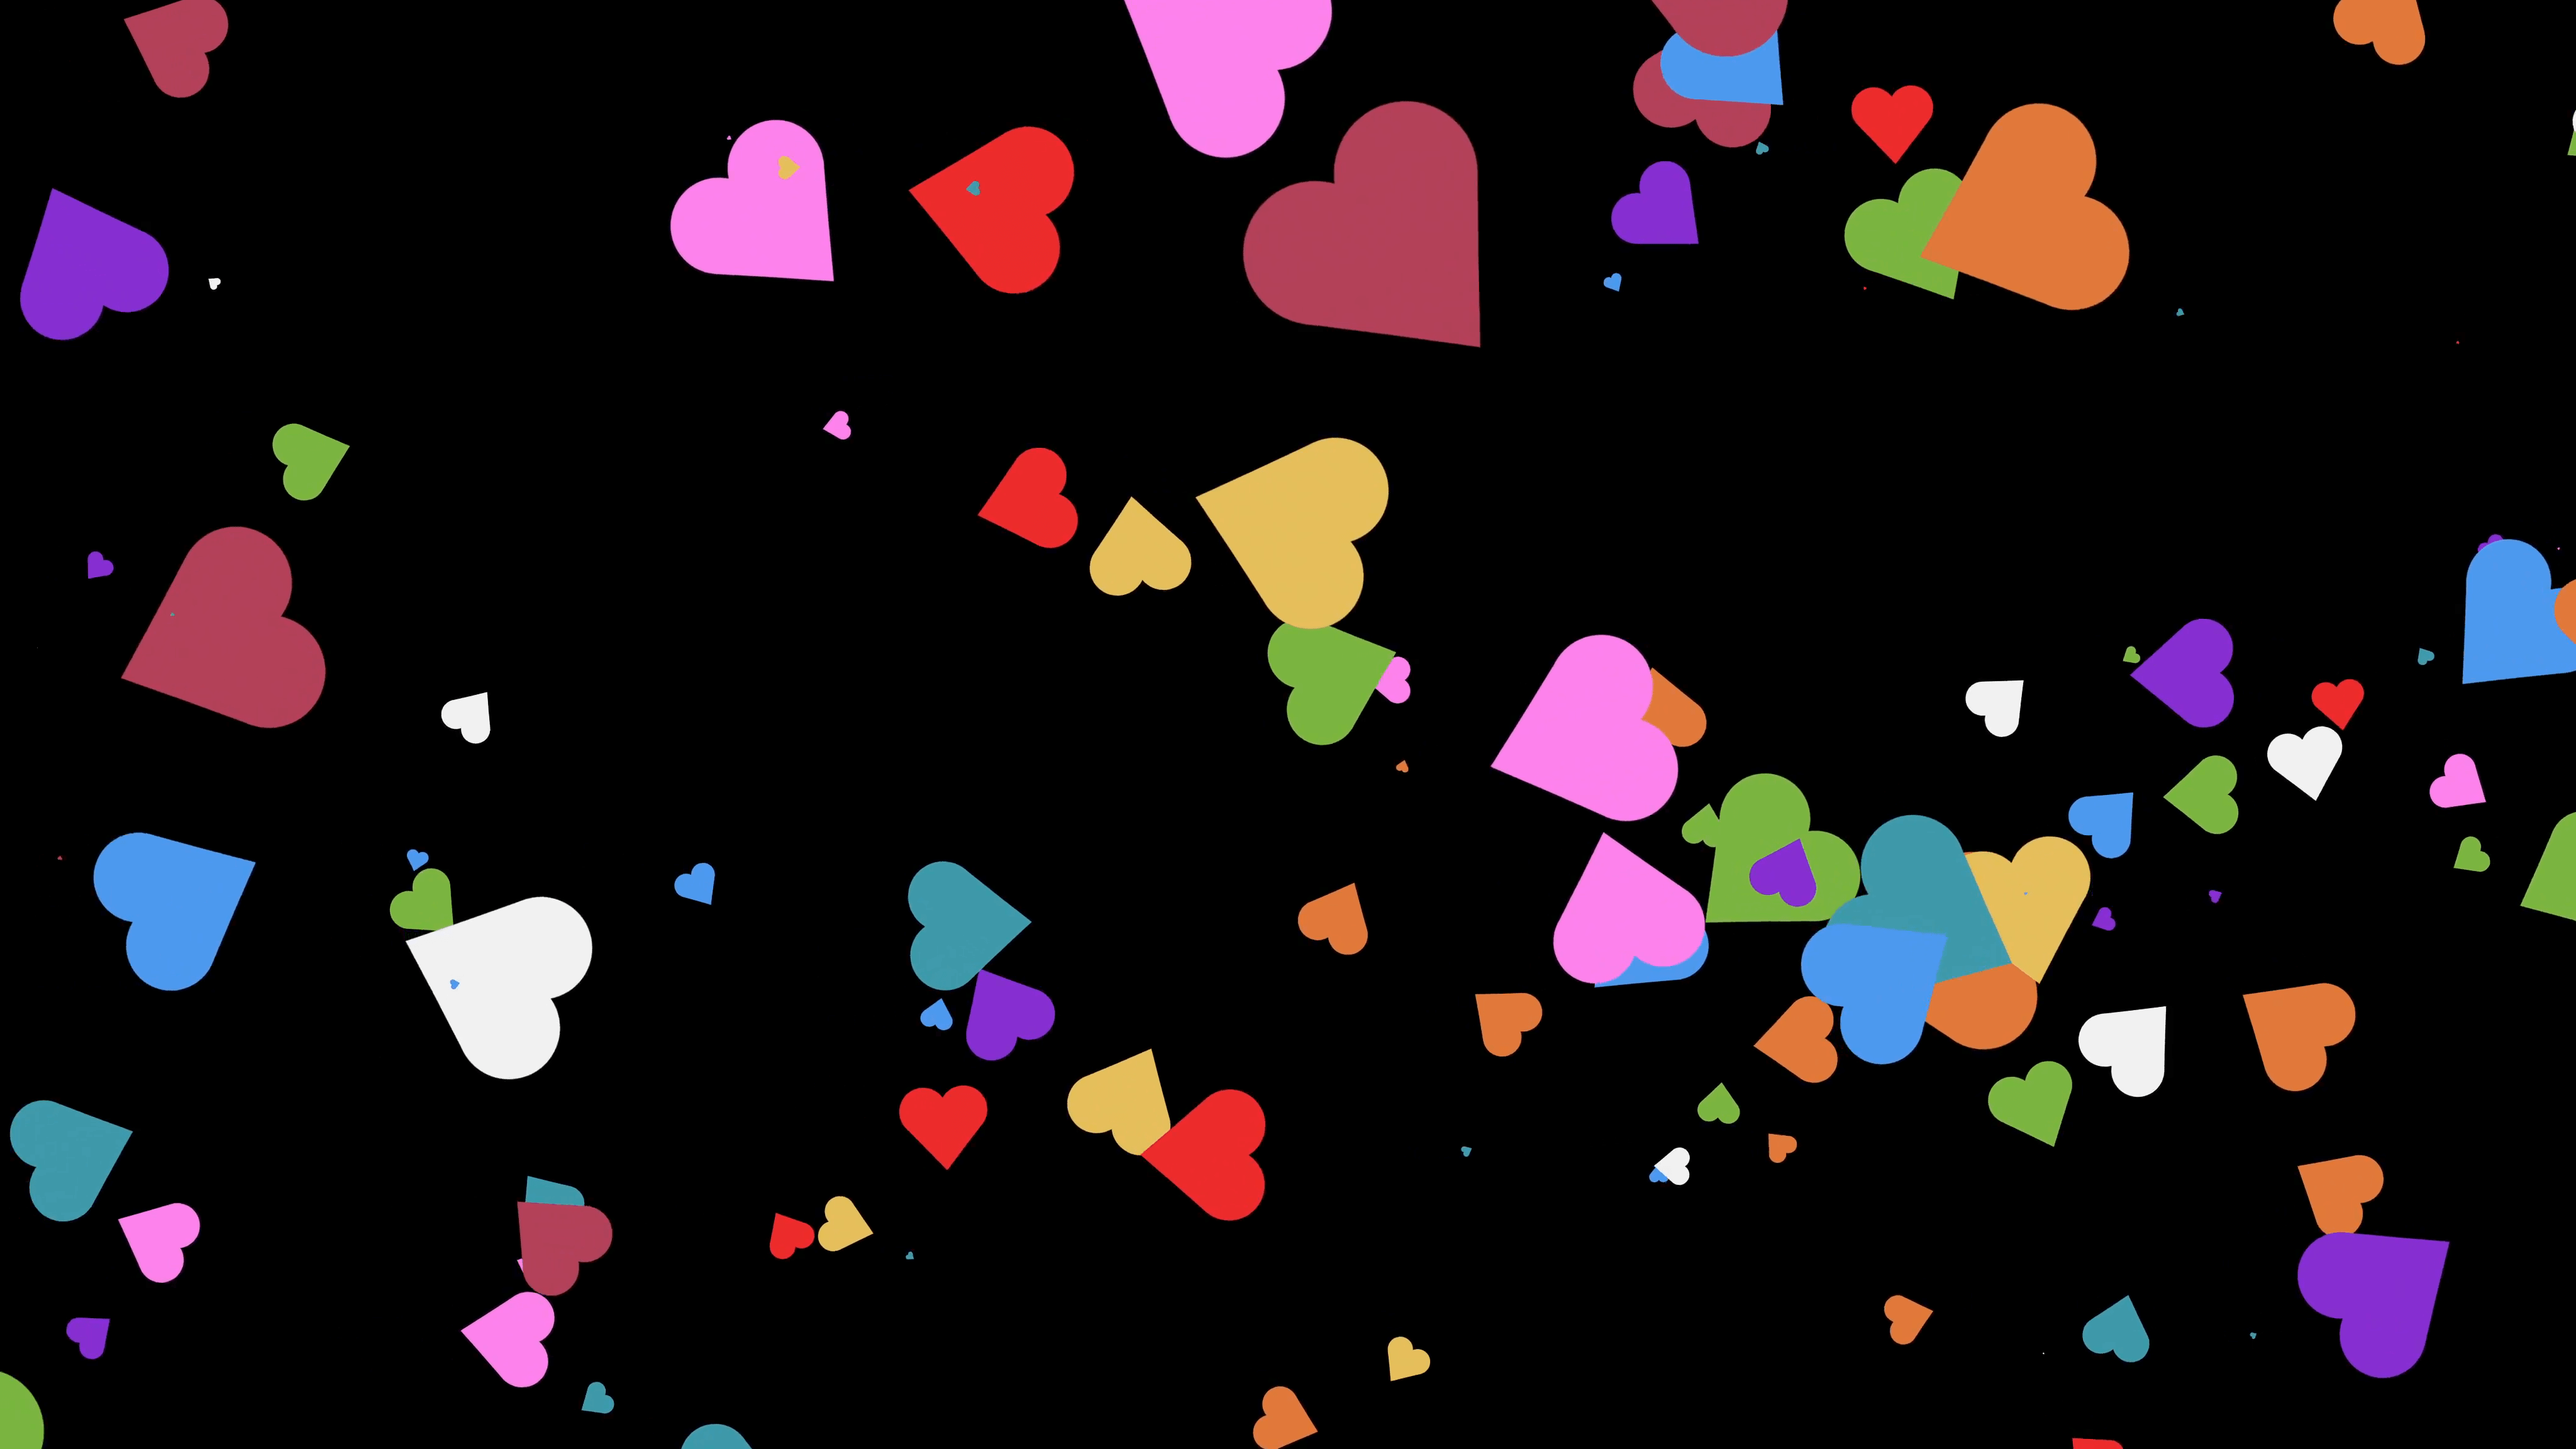 4k colorful Hearts BackGround loop. shining heart shapes loopable